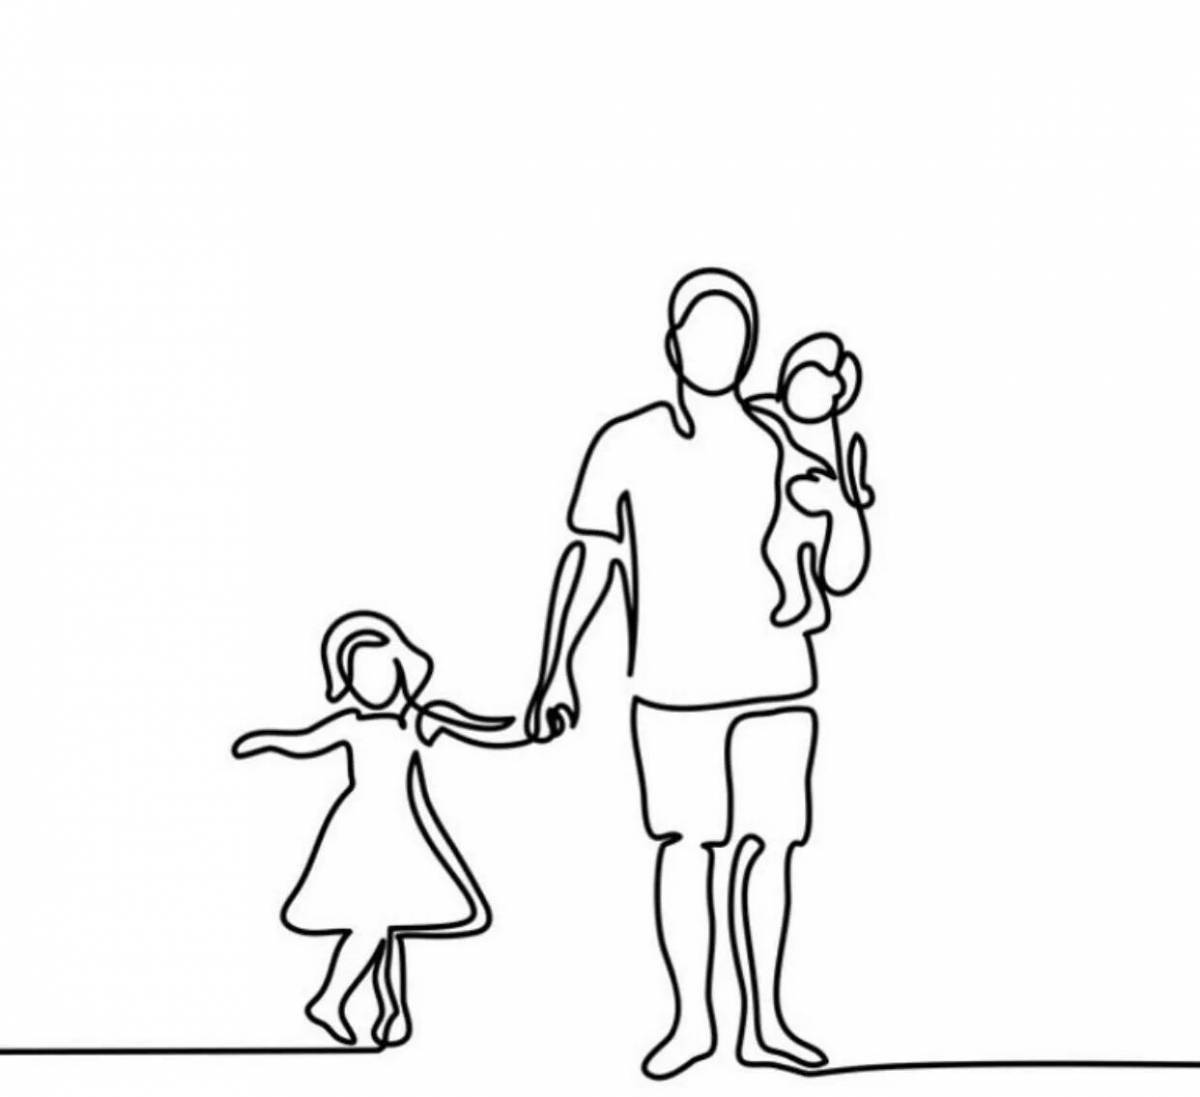 Sweet coloring pages for dad and daughter